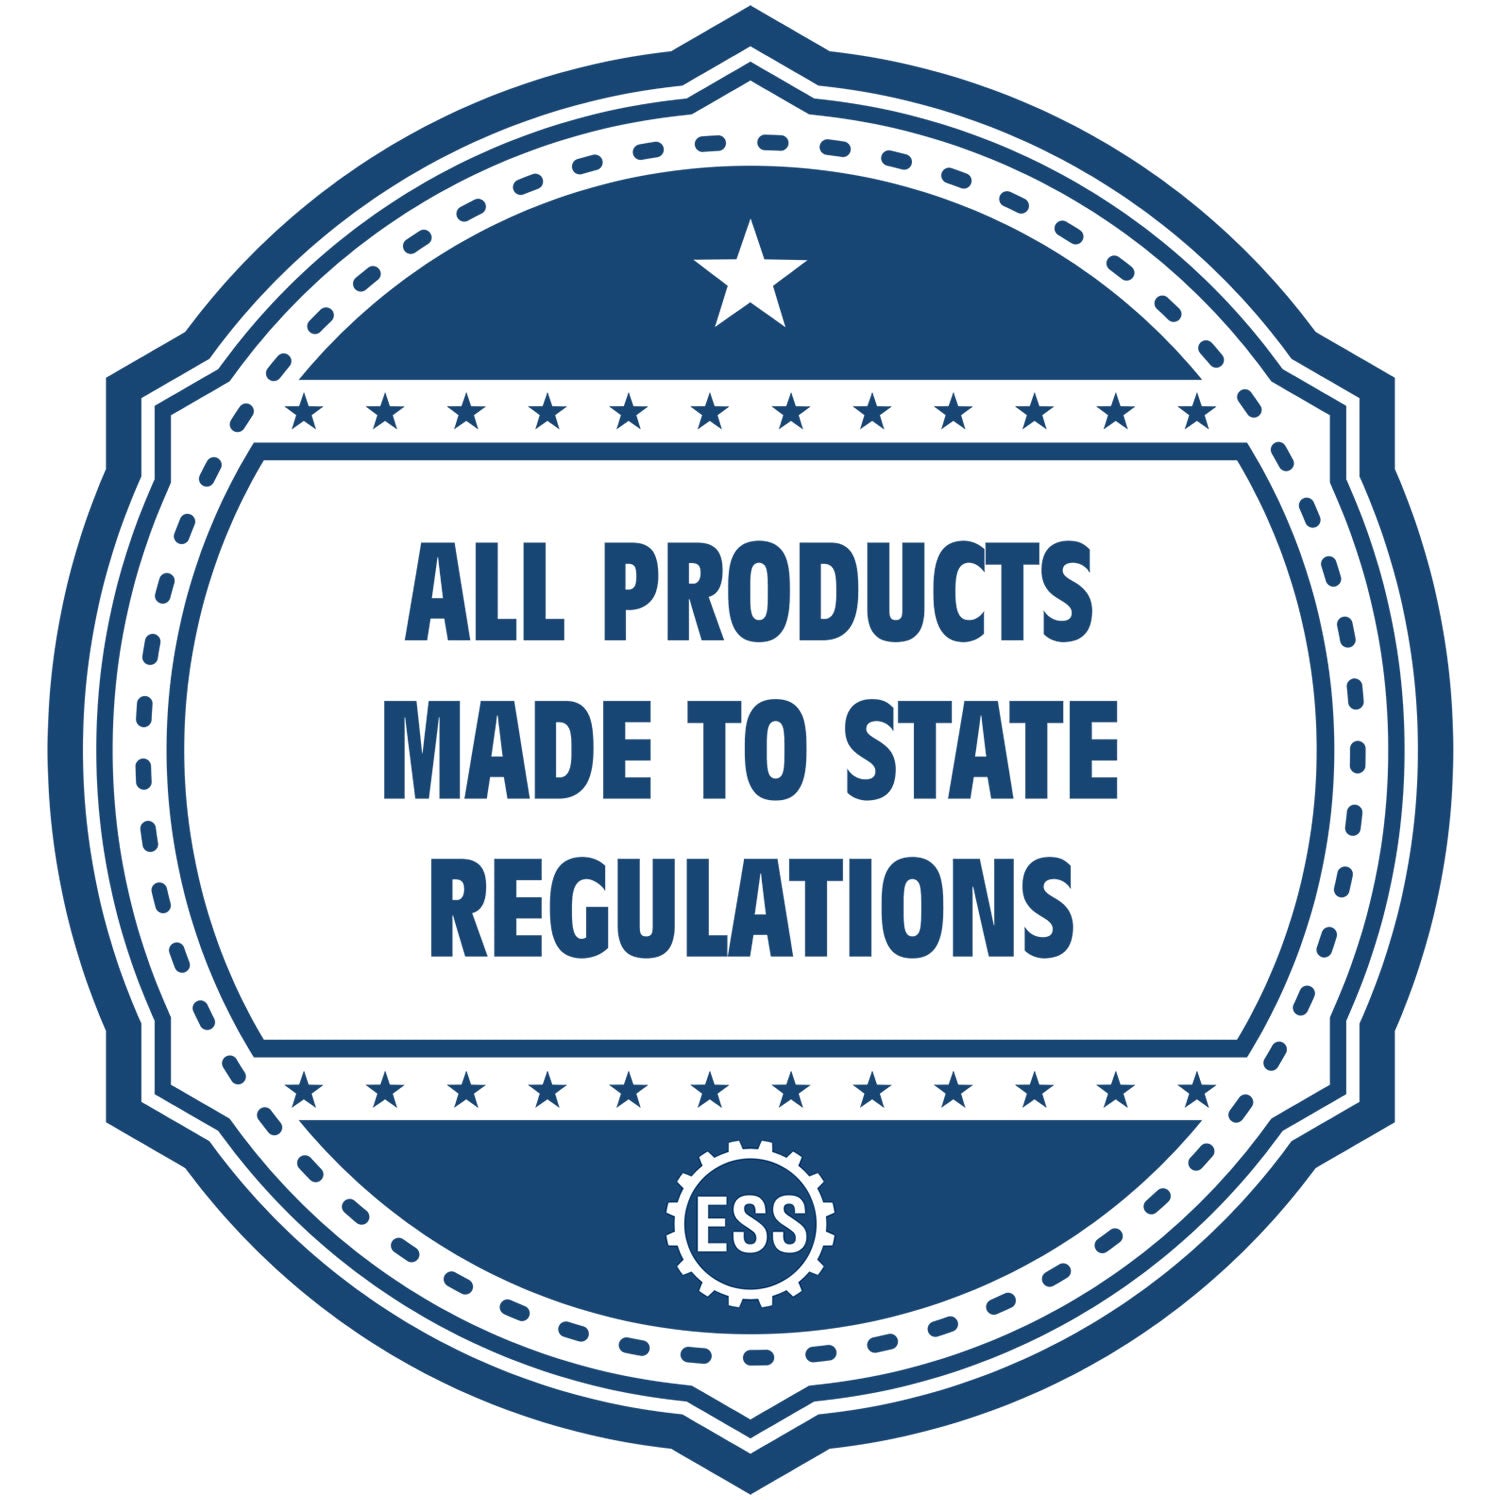 An icon or badge element for the Wisconsin Professional Engineer Seal Stamp showing that this product is made in compliance with state regulations.